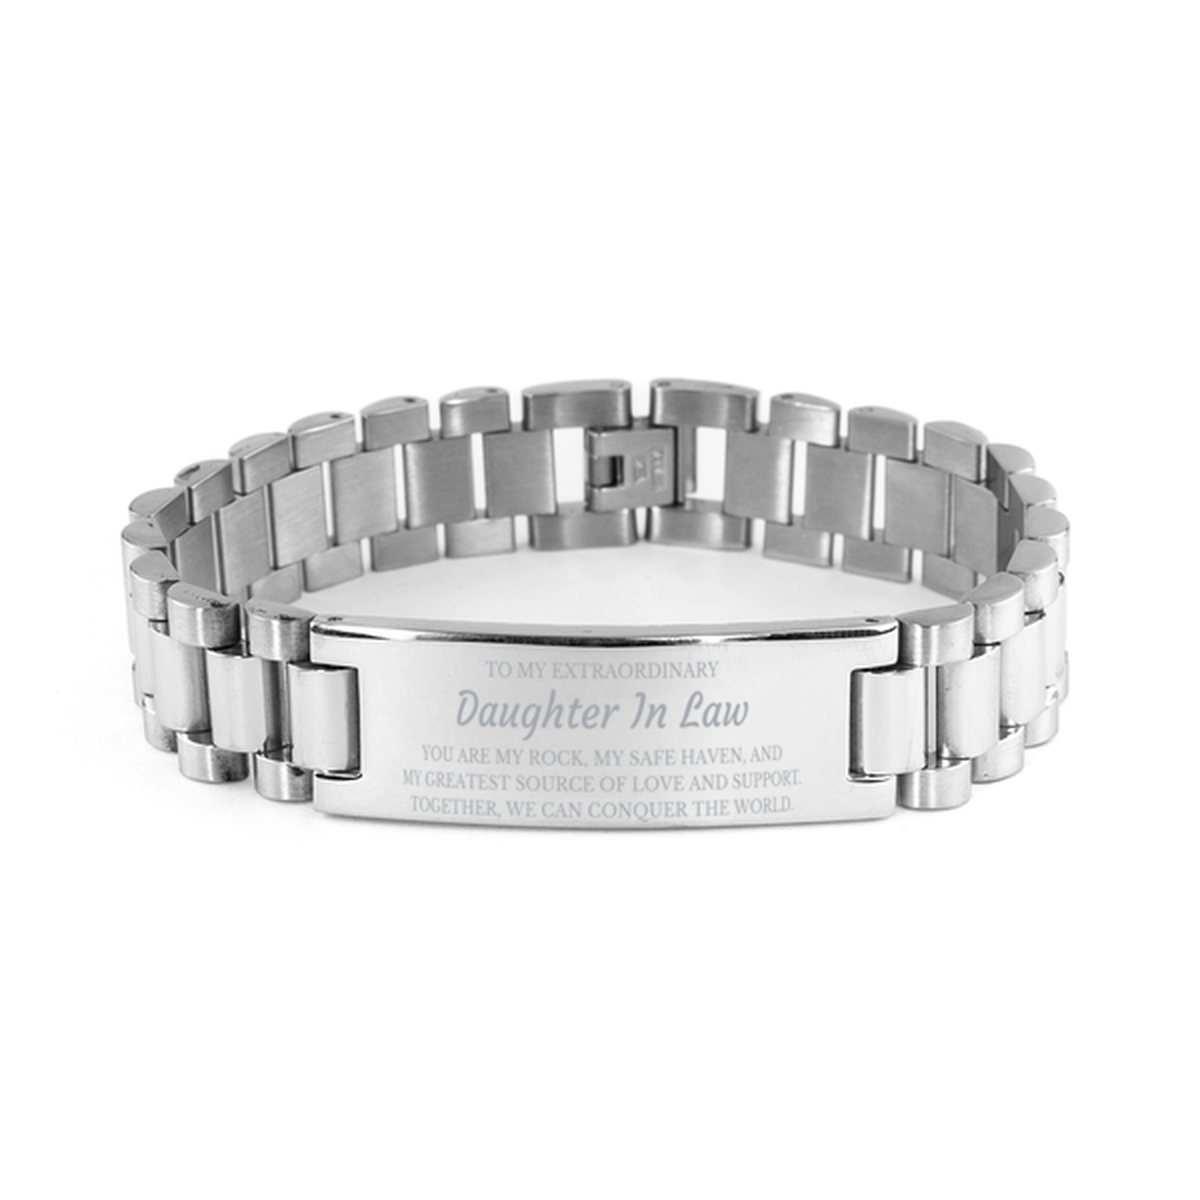 To My Extraordinary Daughter In Law Gifts, Together, we can conquer the world, Birthday Ladder Stainless Steel Bracelet For Daughter In Law, Christmas Gifts For Daughter In Law